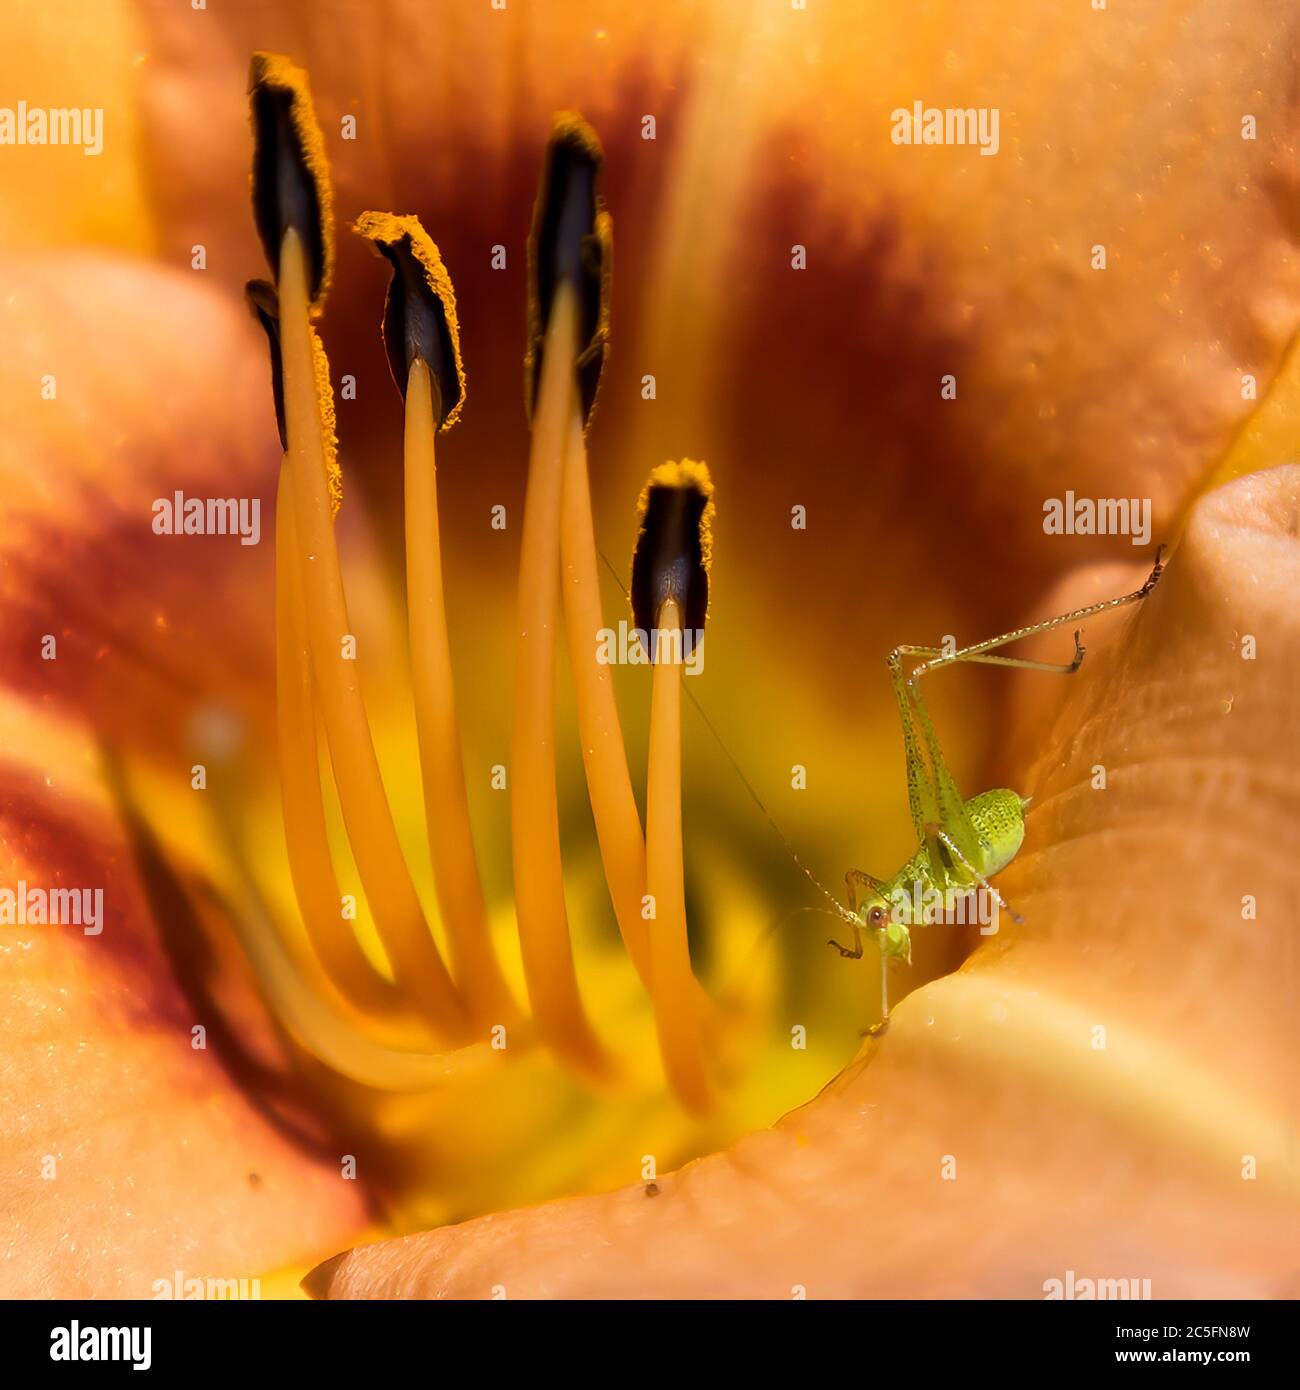 Katydid perches in day lily flower close up with bright vibrant colors. Stock Photo